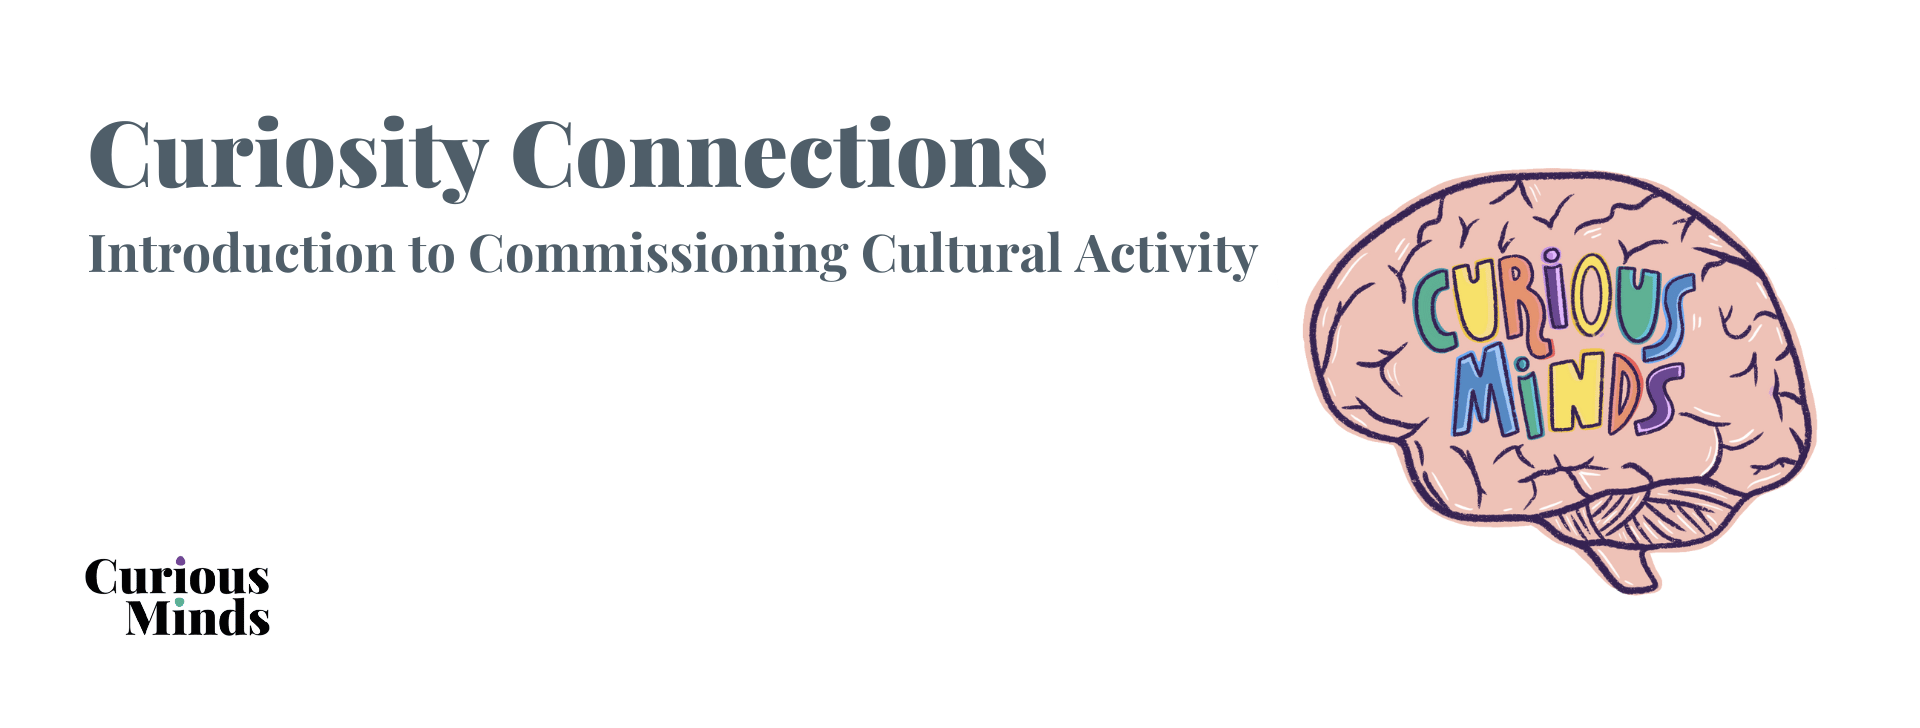 Web banner for Curiosity Connections - Commissioning Cultural Activity in your School